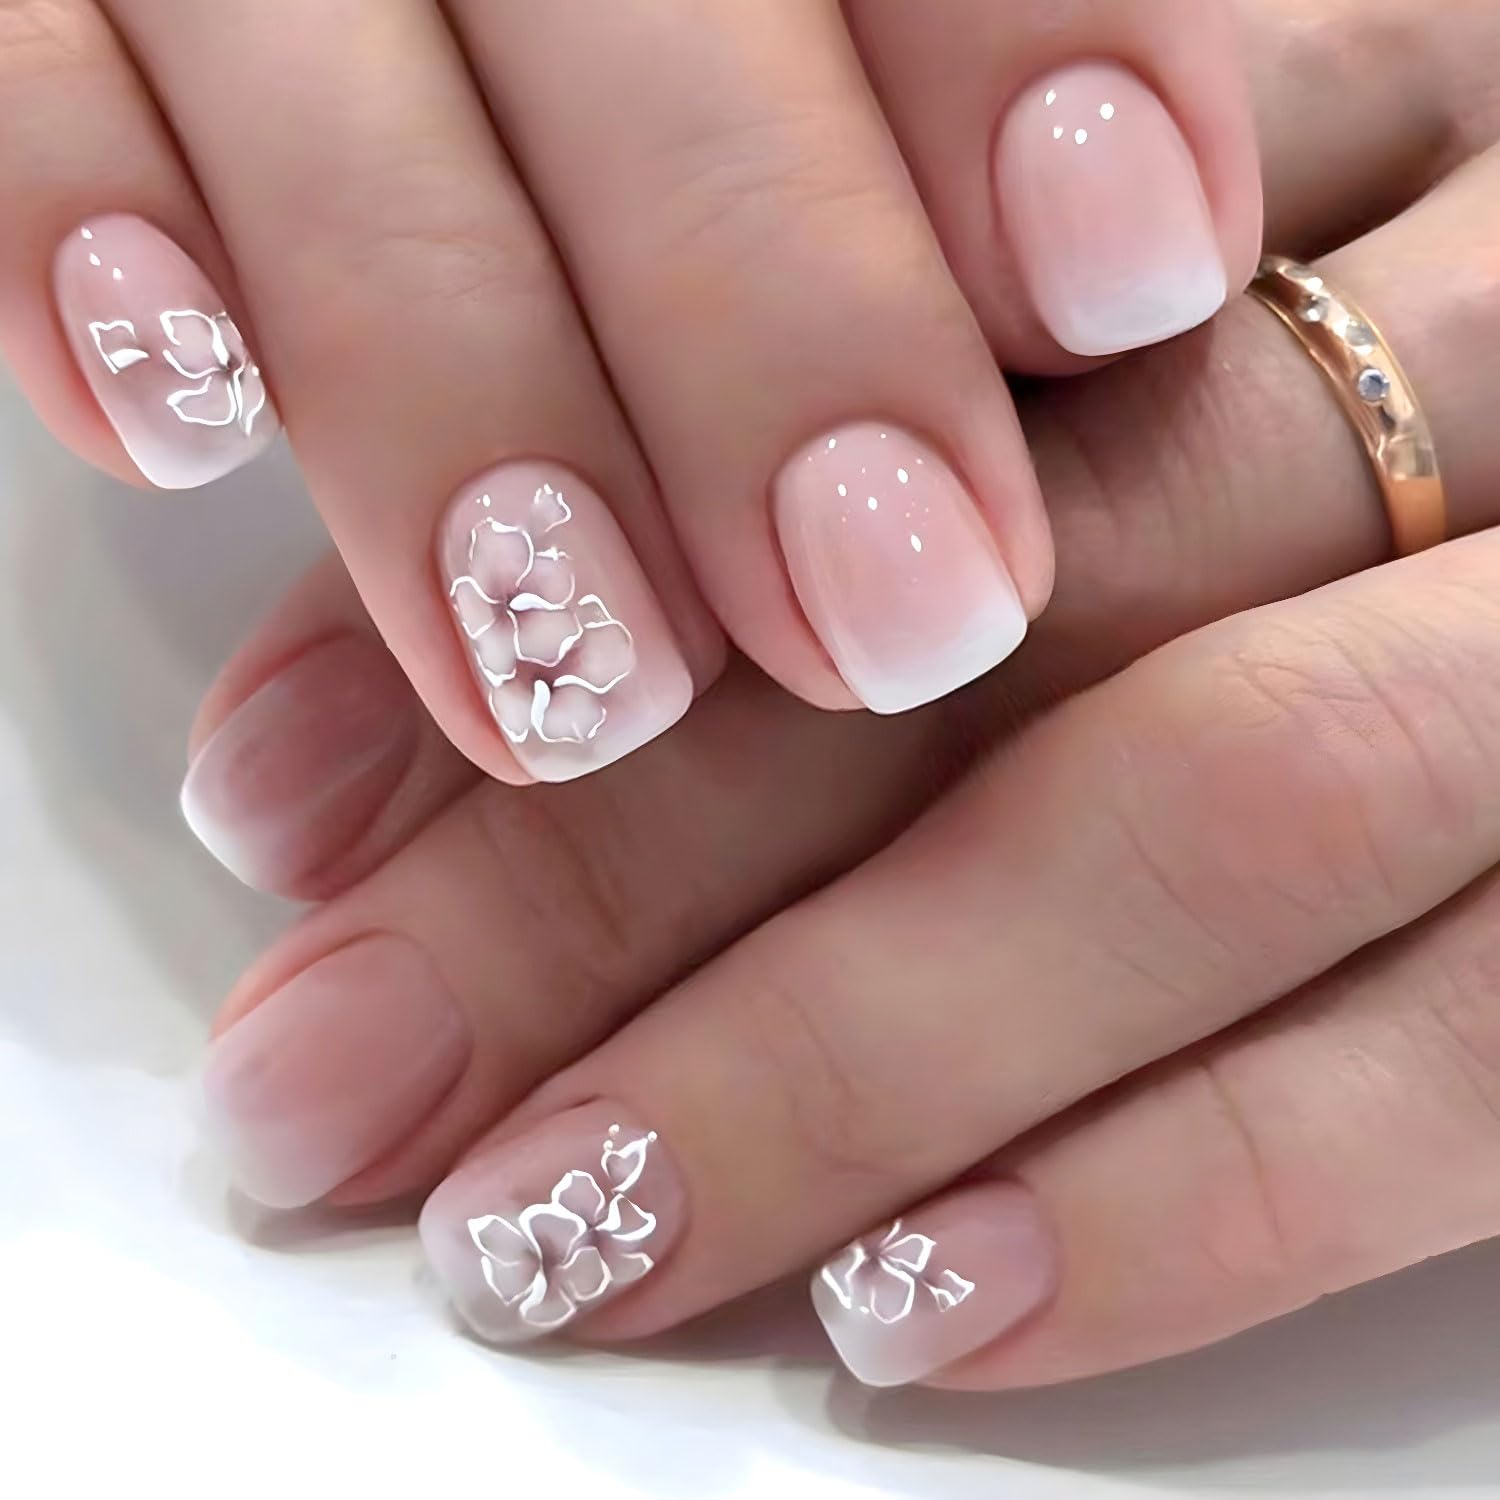 Romantic Nail Art Ideas for Valentine's Day